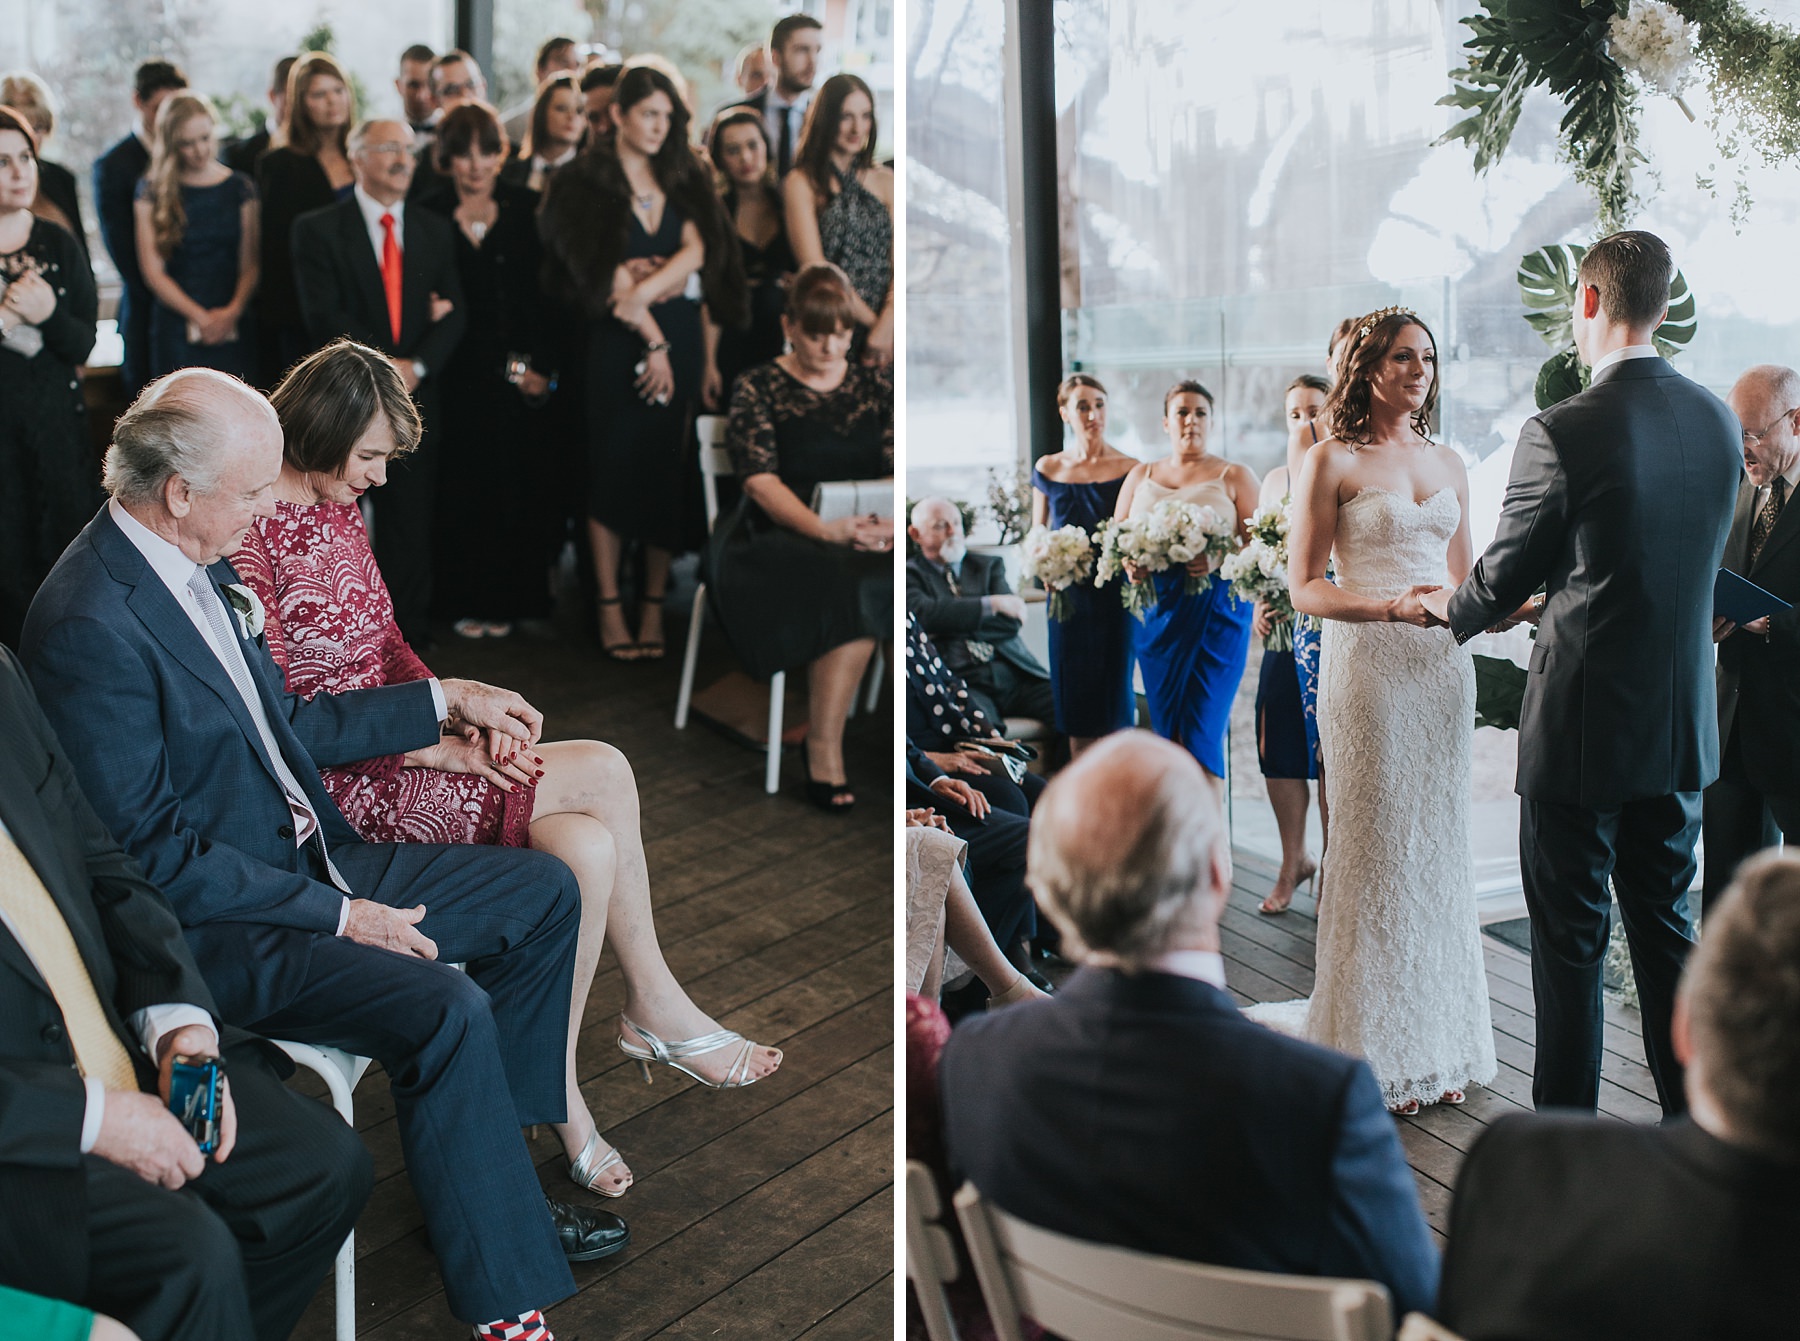 raw and honest moments on your wedding day